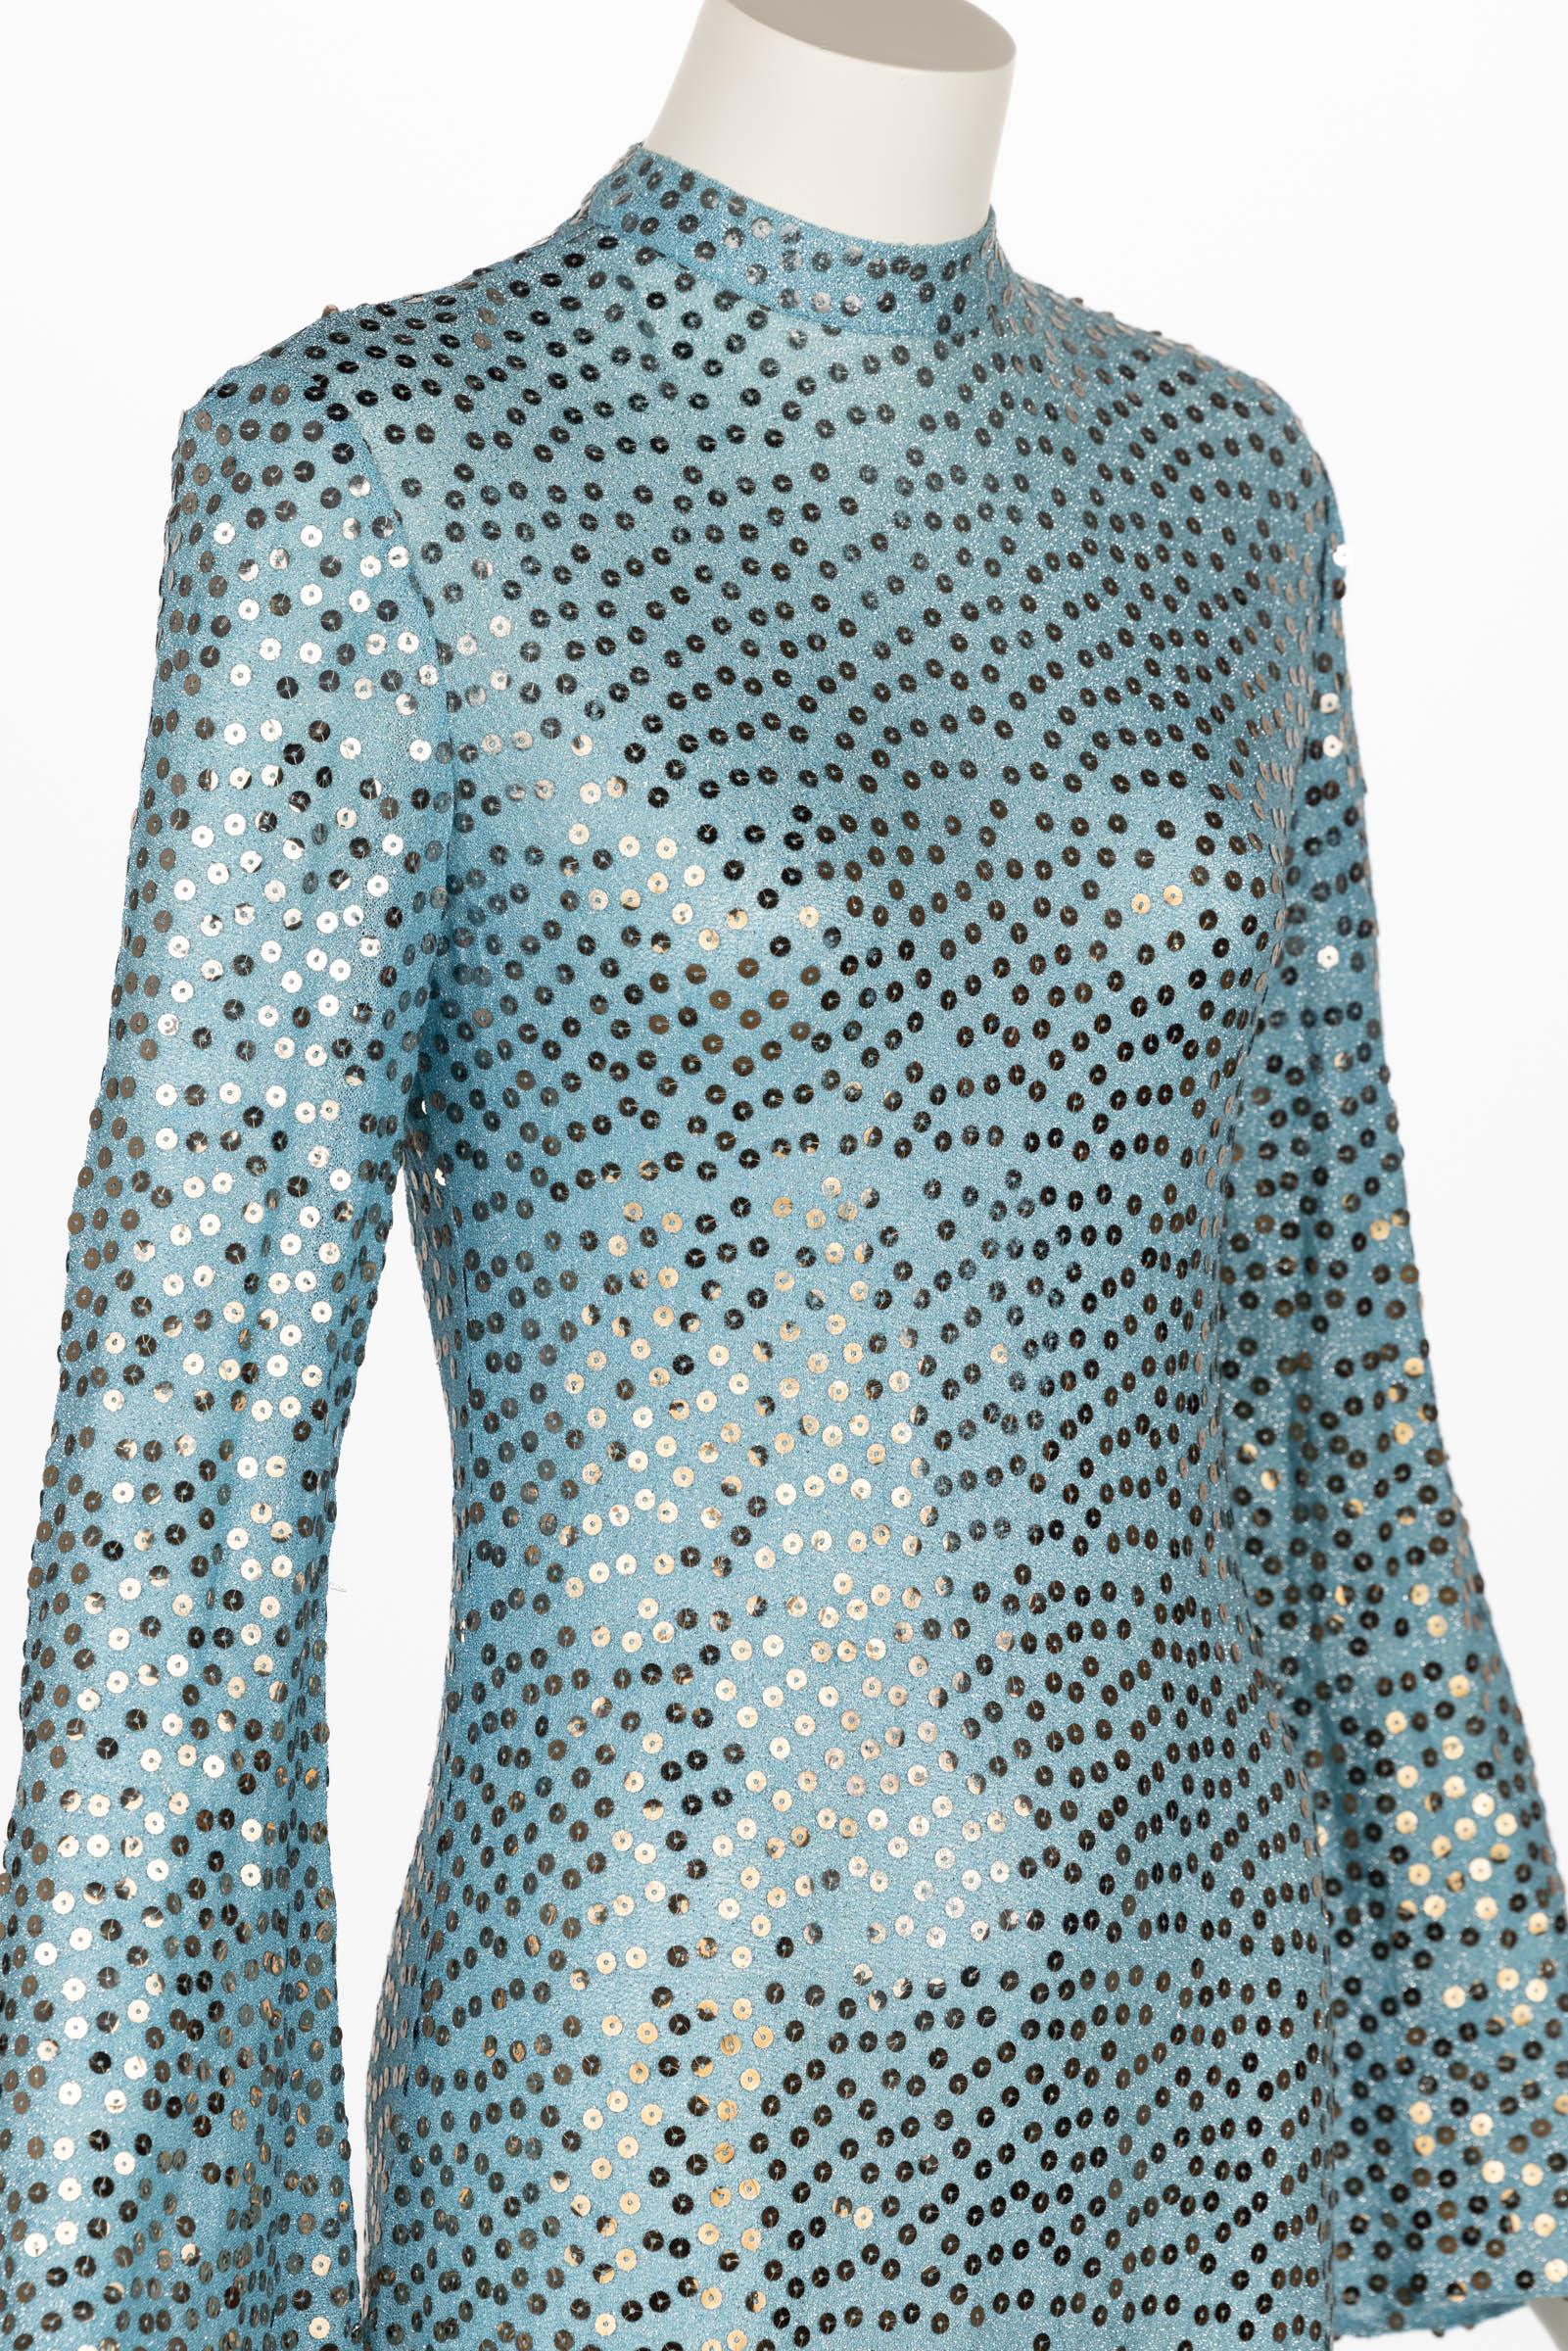 Mollie Parnis Silver Sequin Ice Blue Knit Lame Jersey Dress, 1970s In Excellent Condition For Sale In Boca Raton, FL